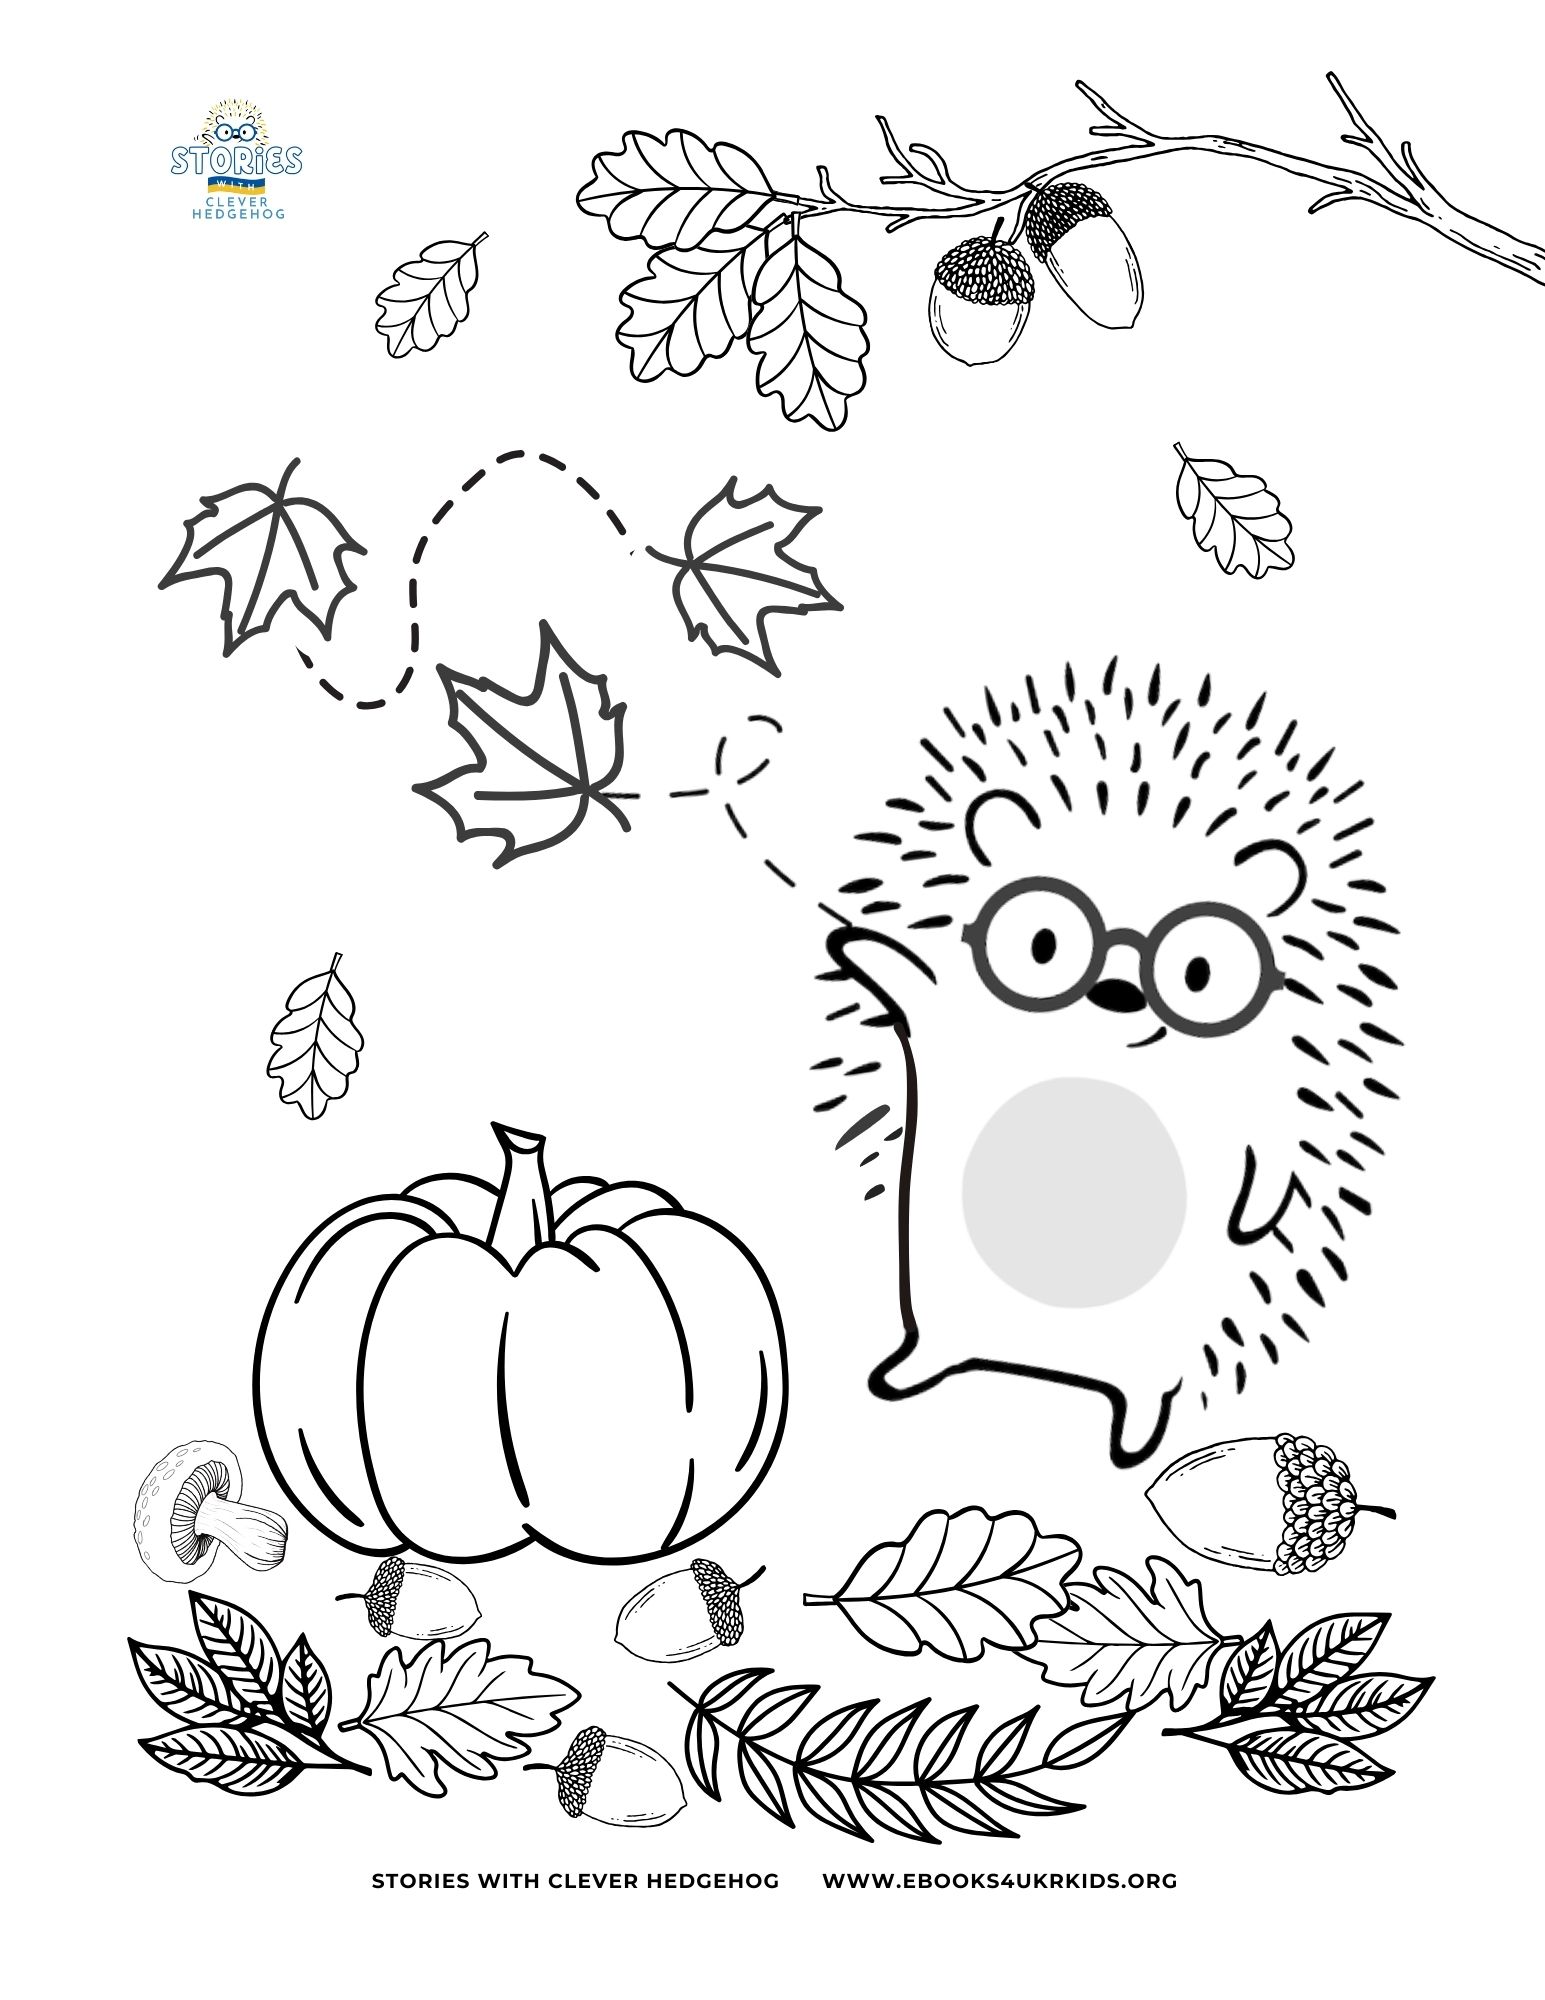 Fun fall activities with Clever Hedgehog